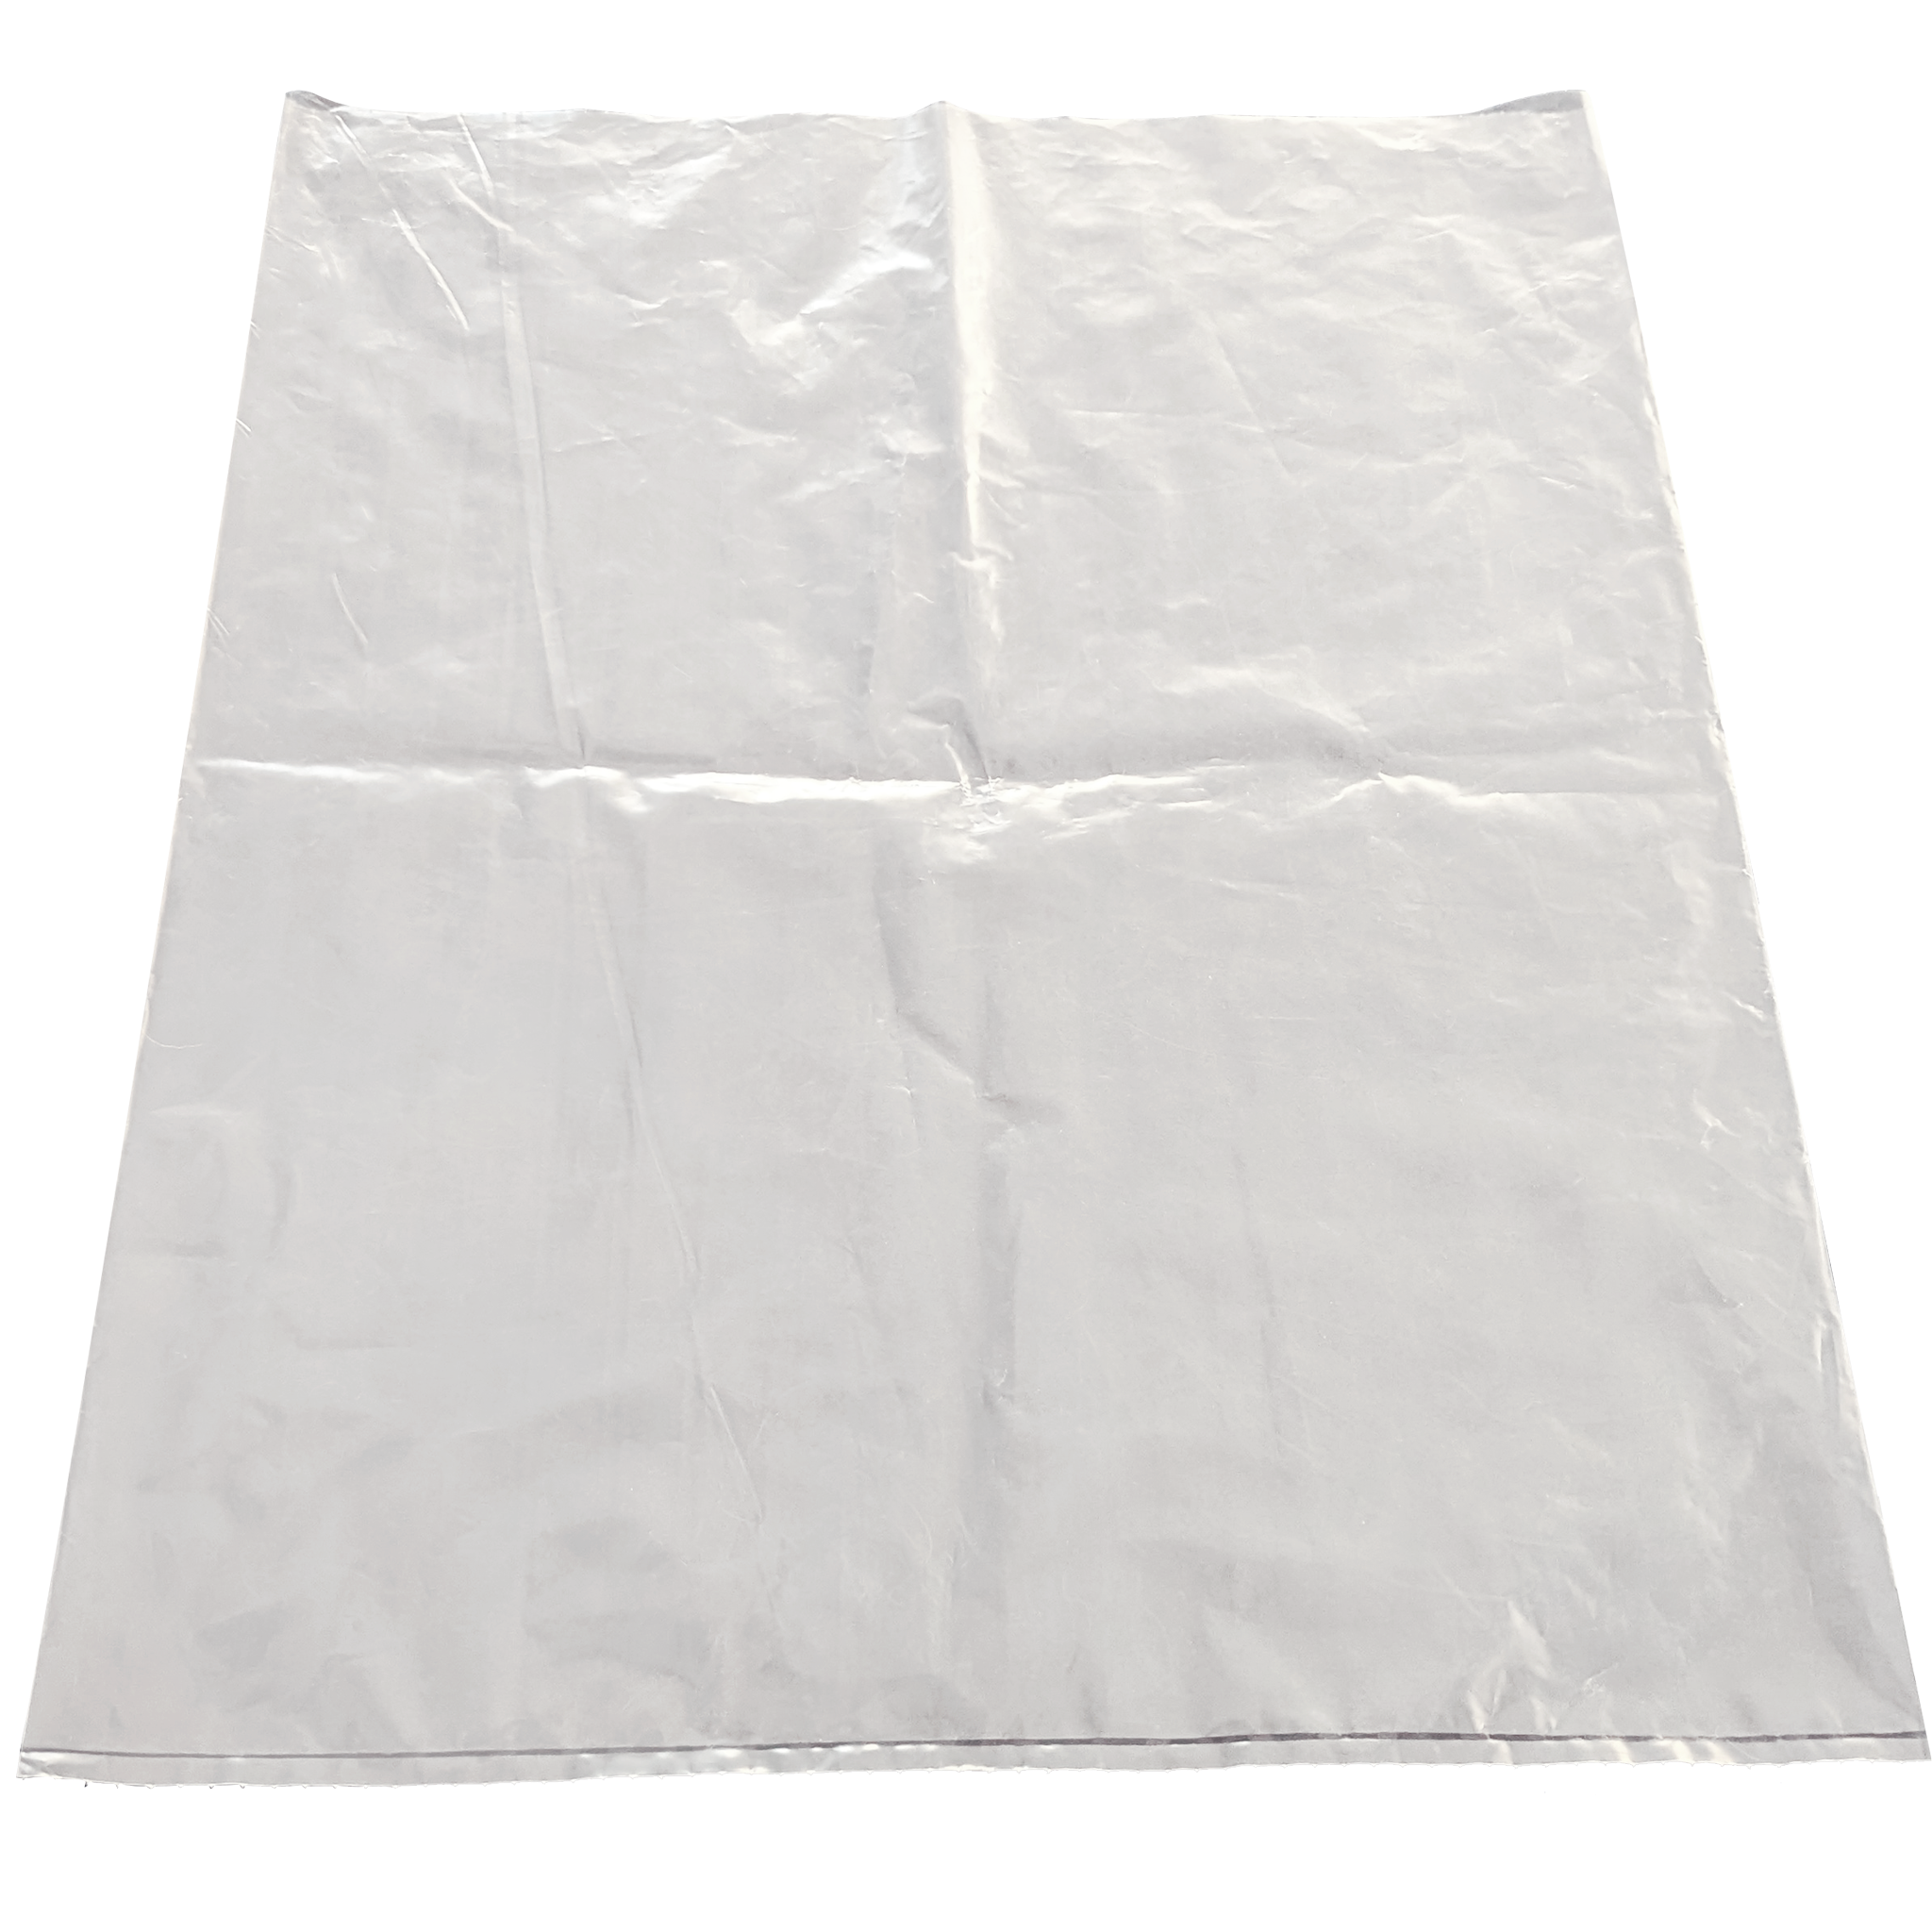 Poly / Garment Bags - Better Packaging Co